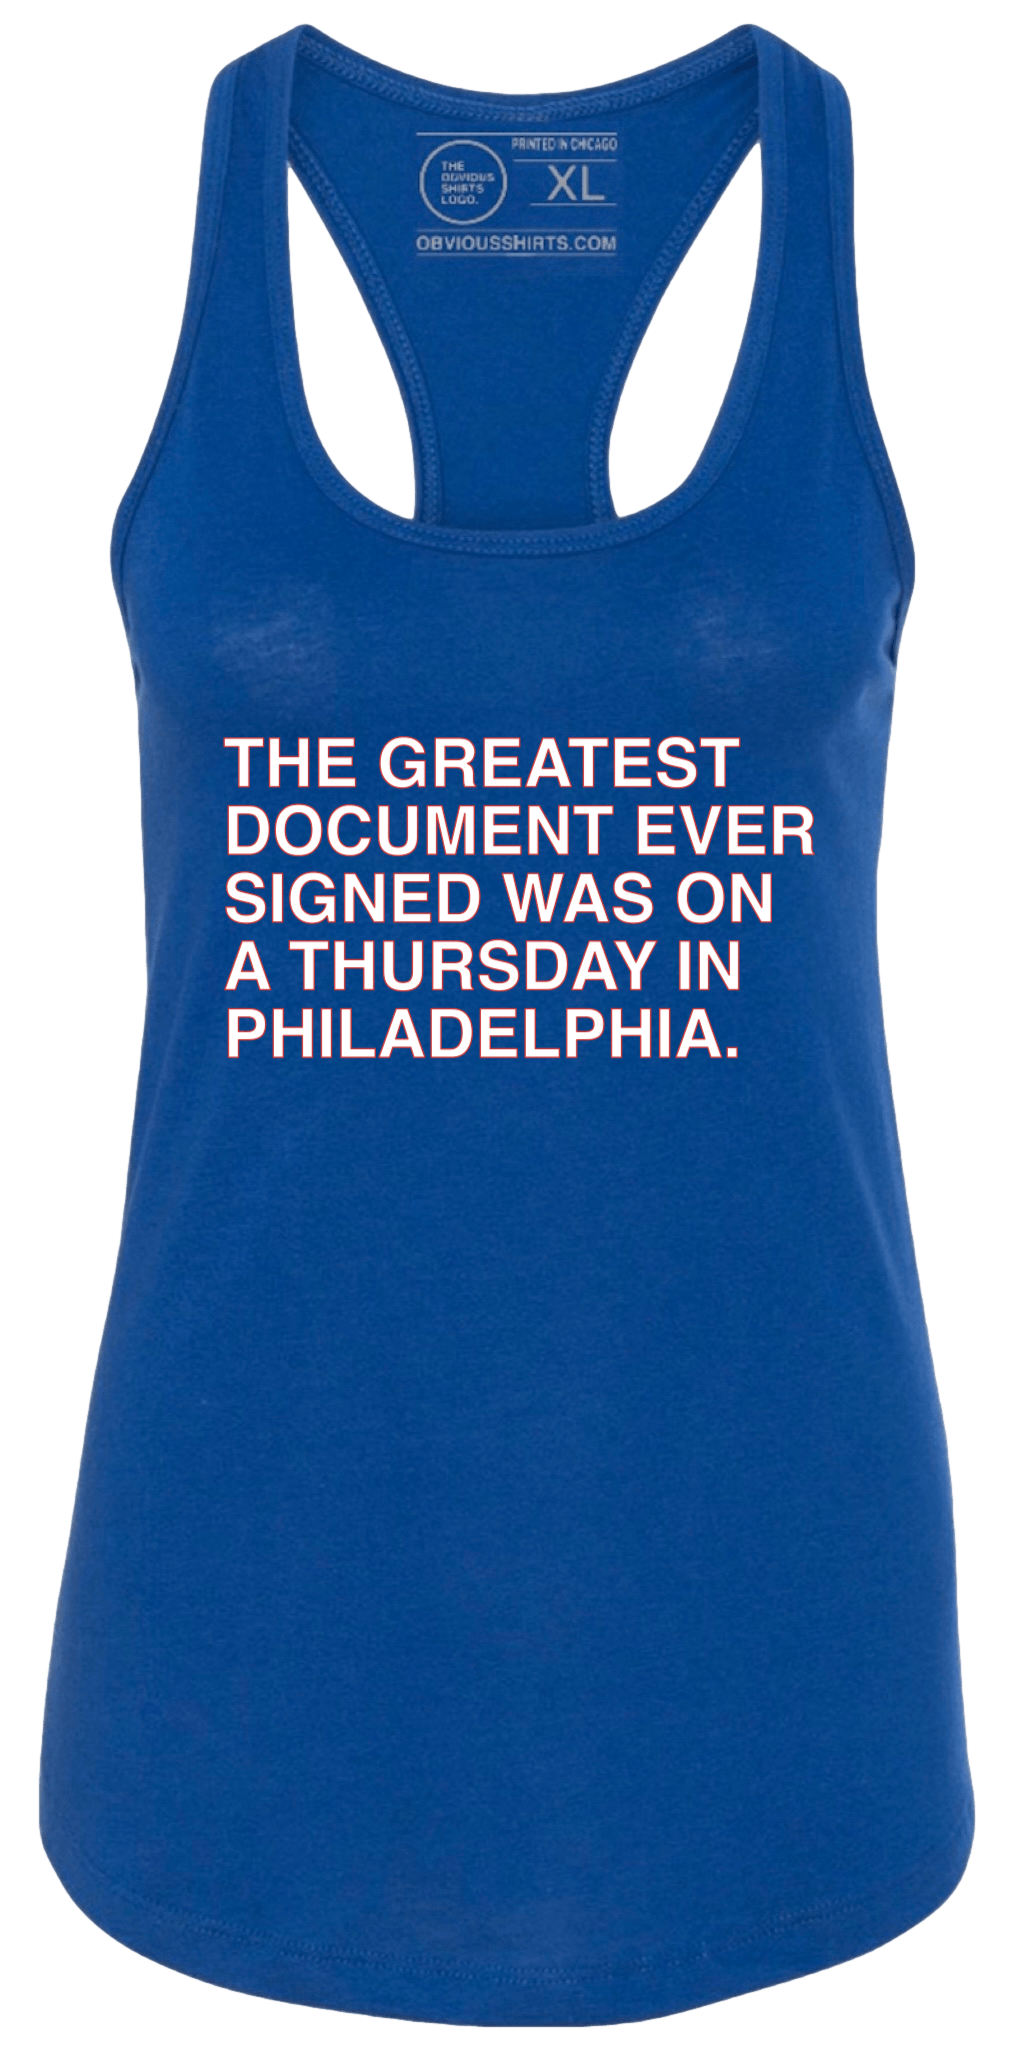 THE GREATEST DOCUMENT EVER SIGNED. (WOMEN'S TANK) - OBVIOUS SHIRTS